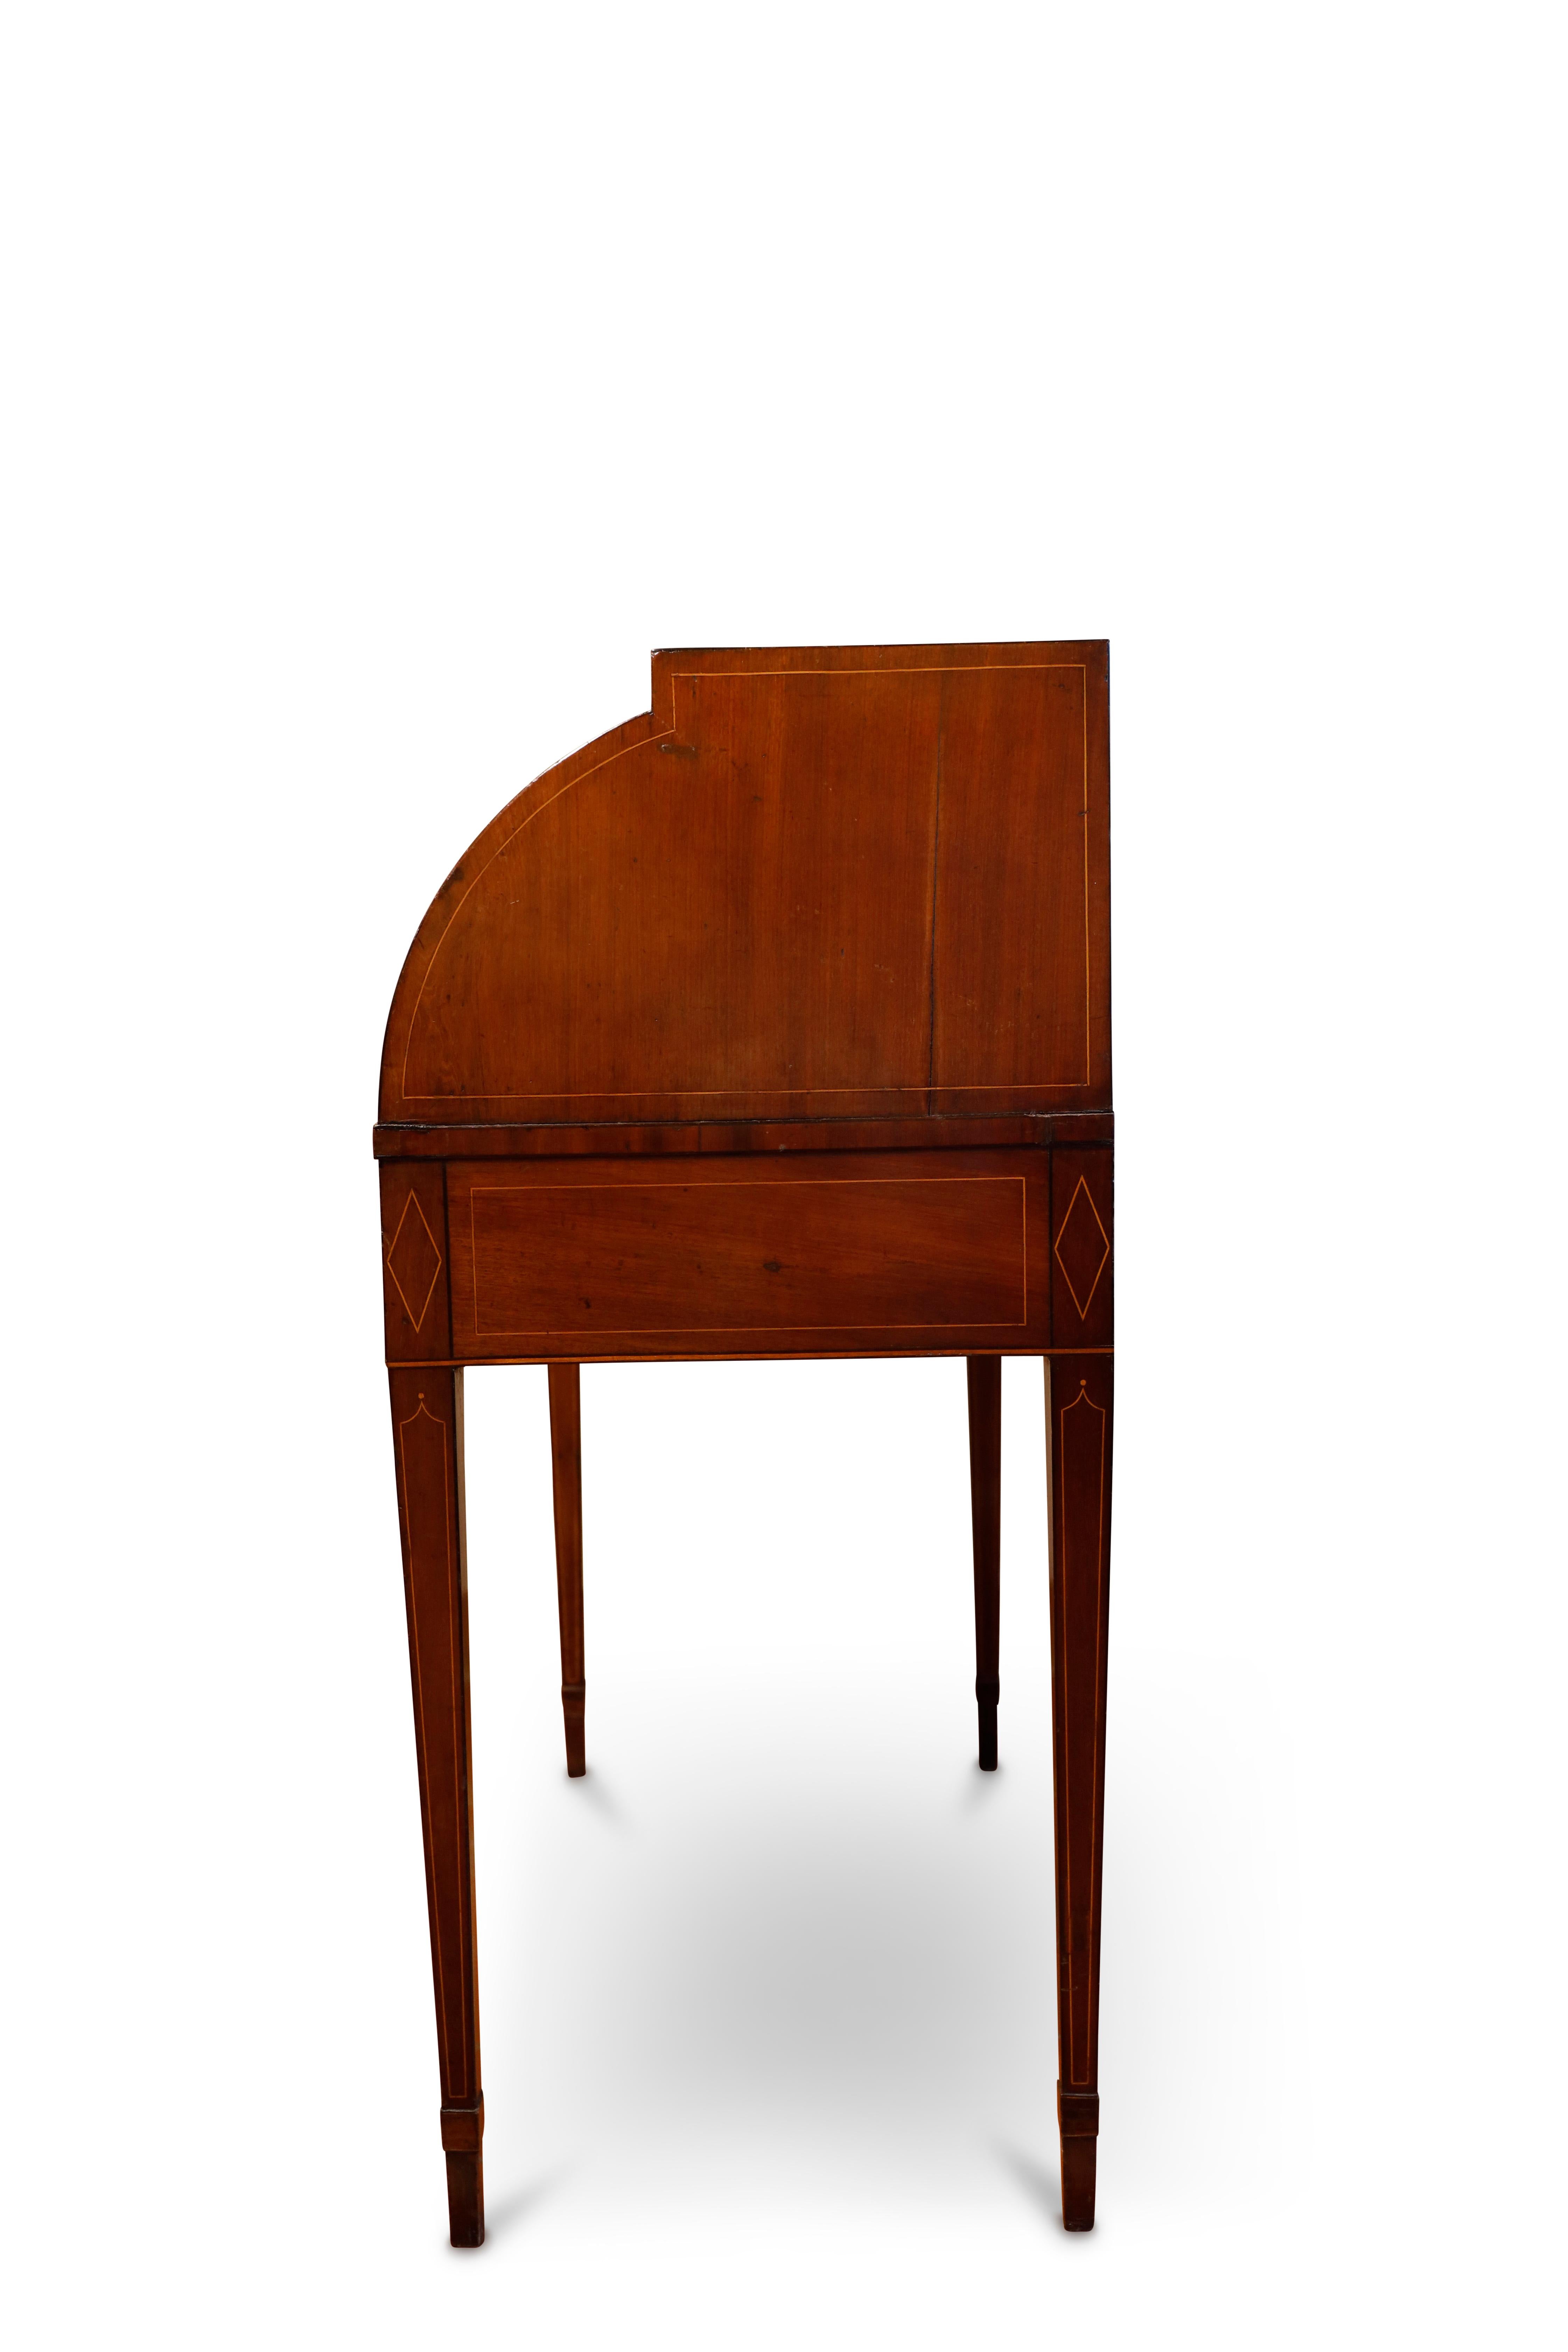 Scottish, George III Mahogany and Sycamore Banded Cylinder Bureau For Sale 12